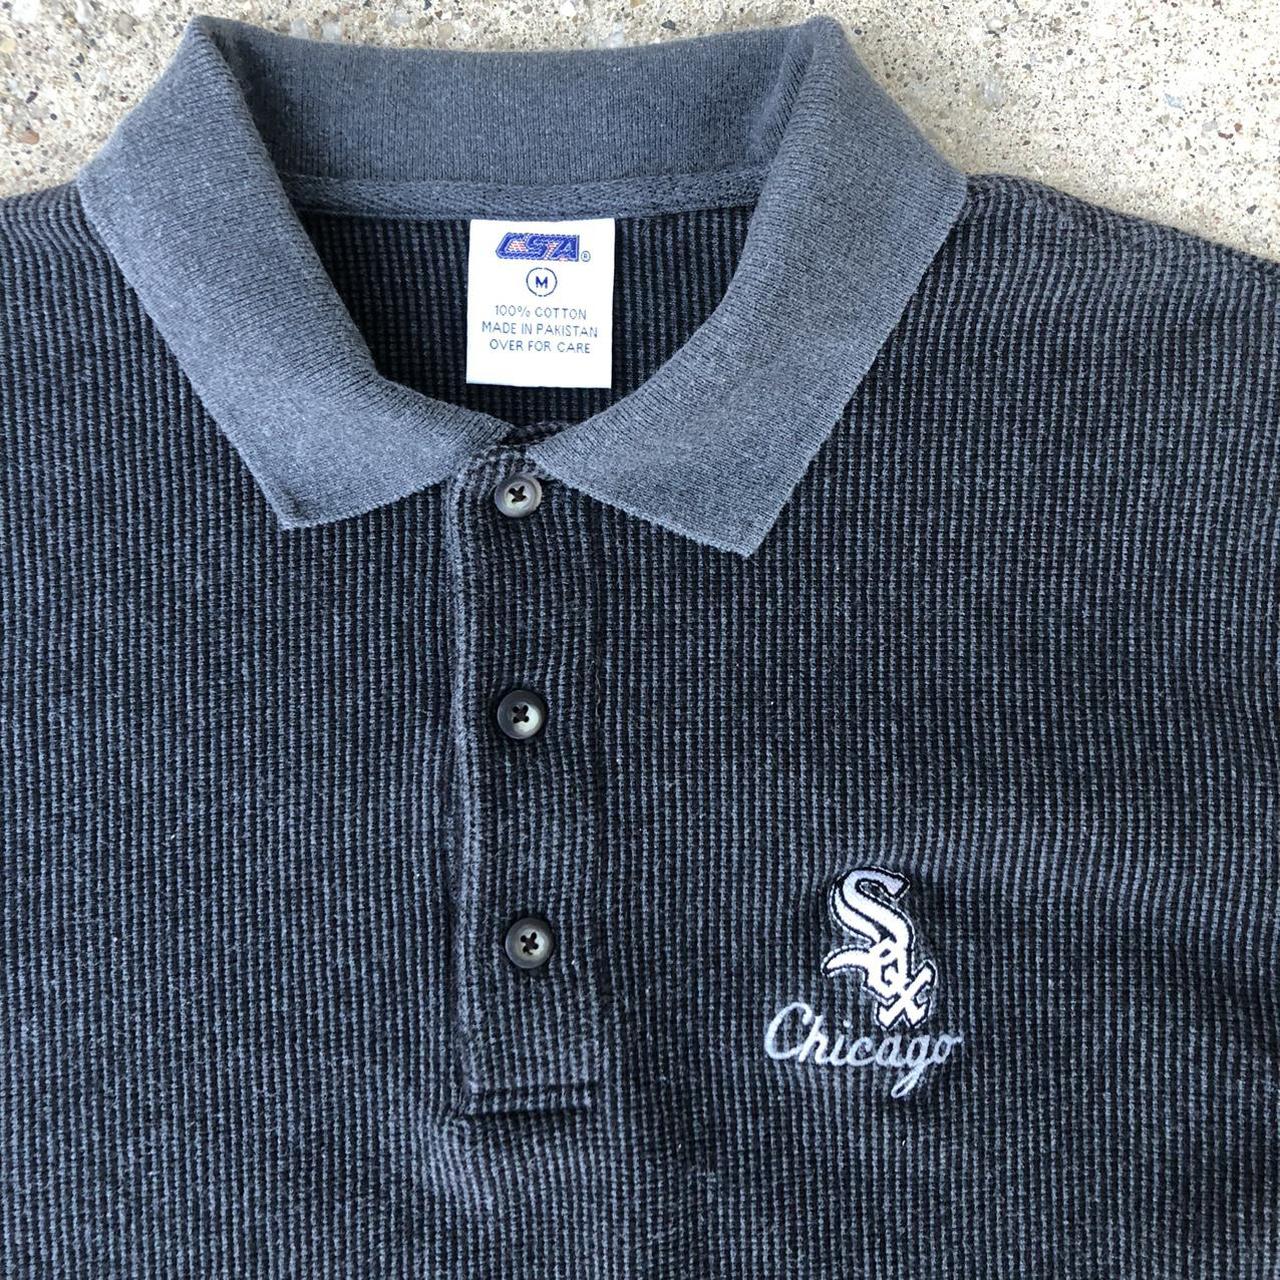 white sox polo this piece has a really lightweight - Depop